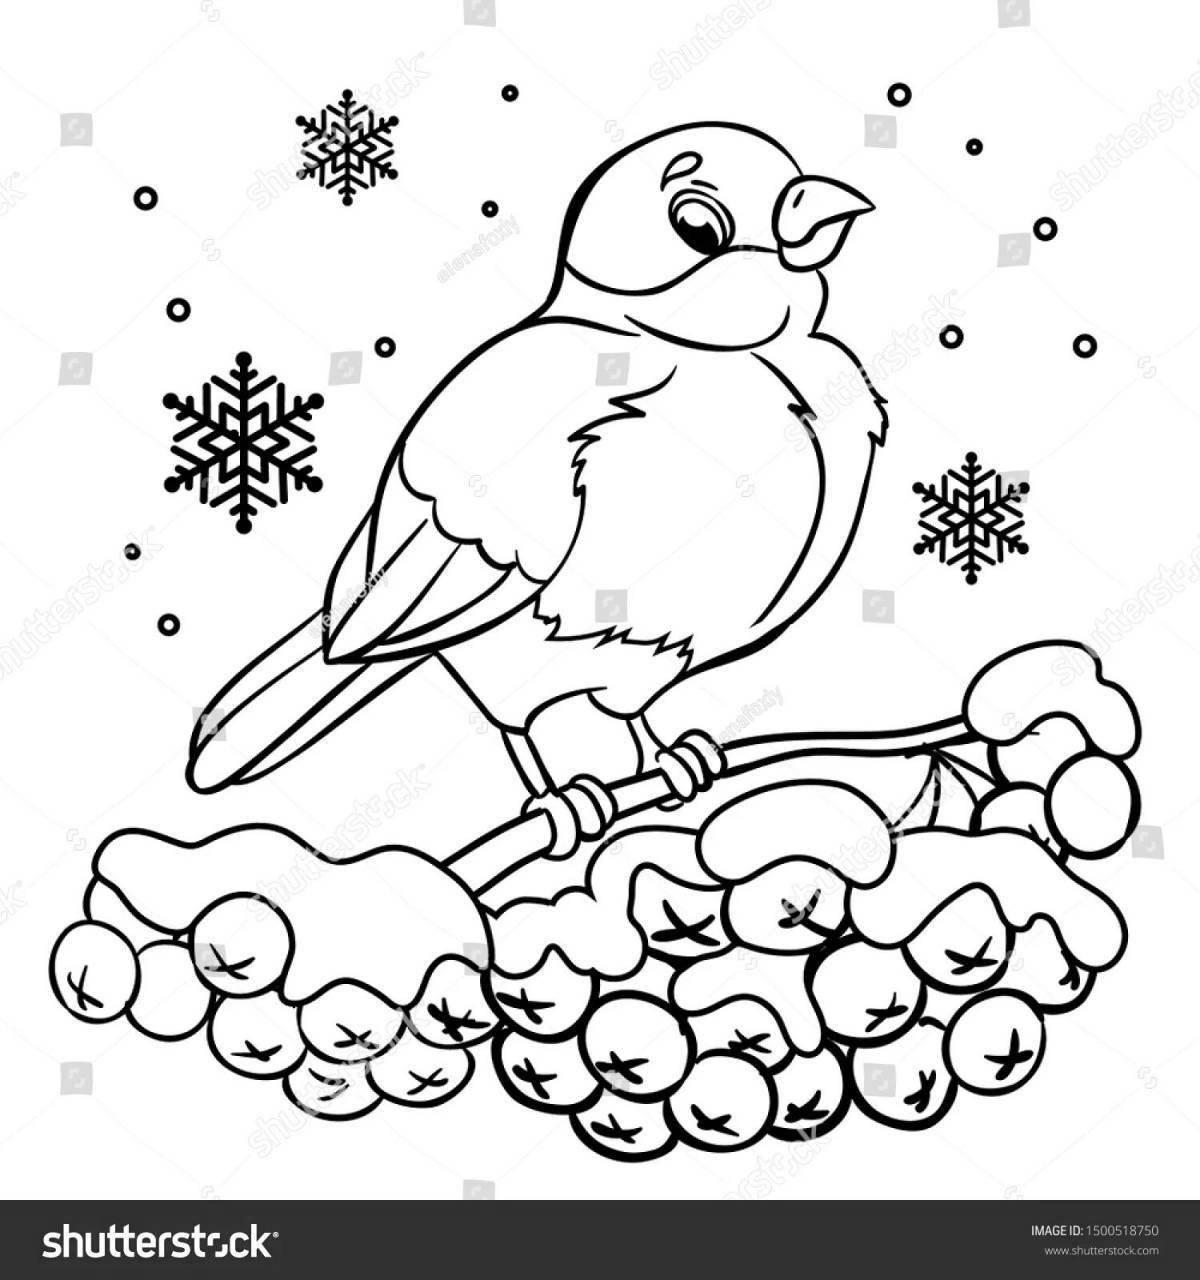 Coloring plush bird on a branch in winter